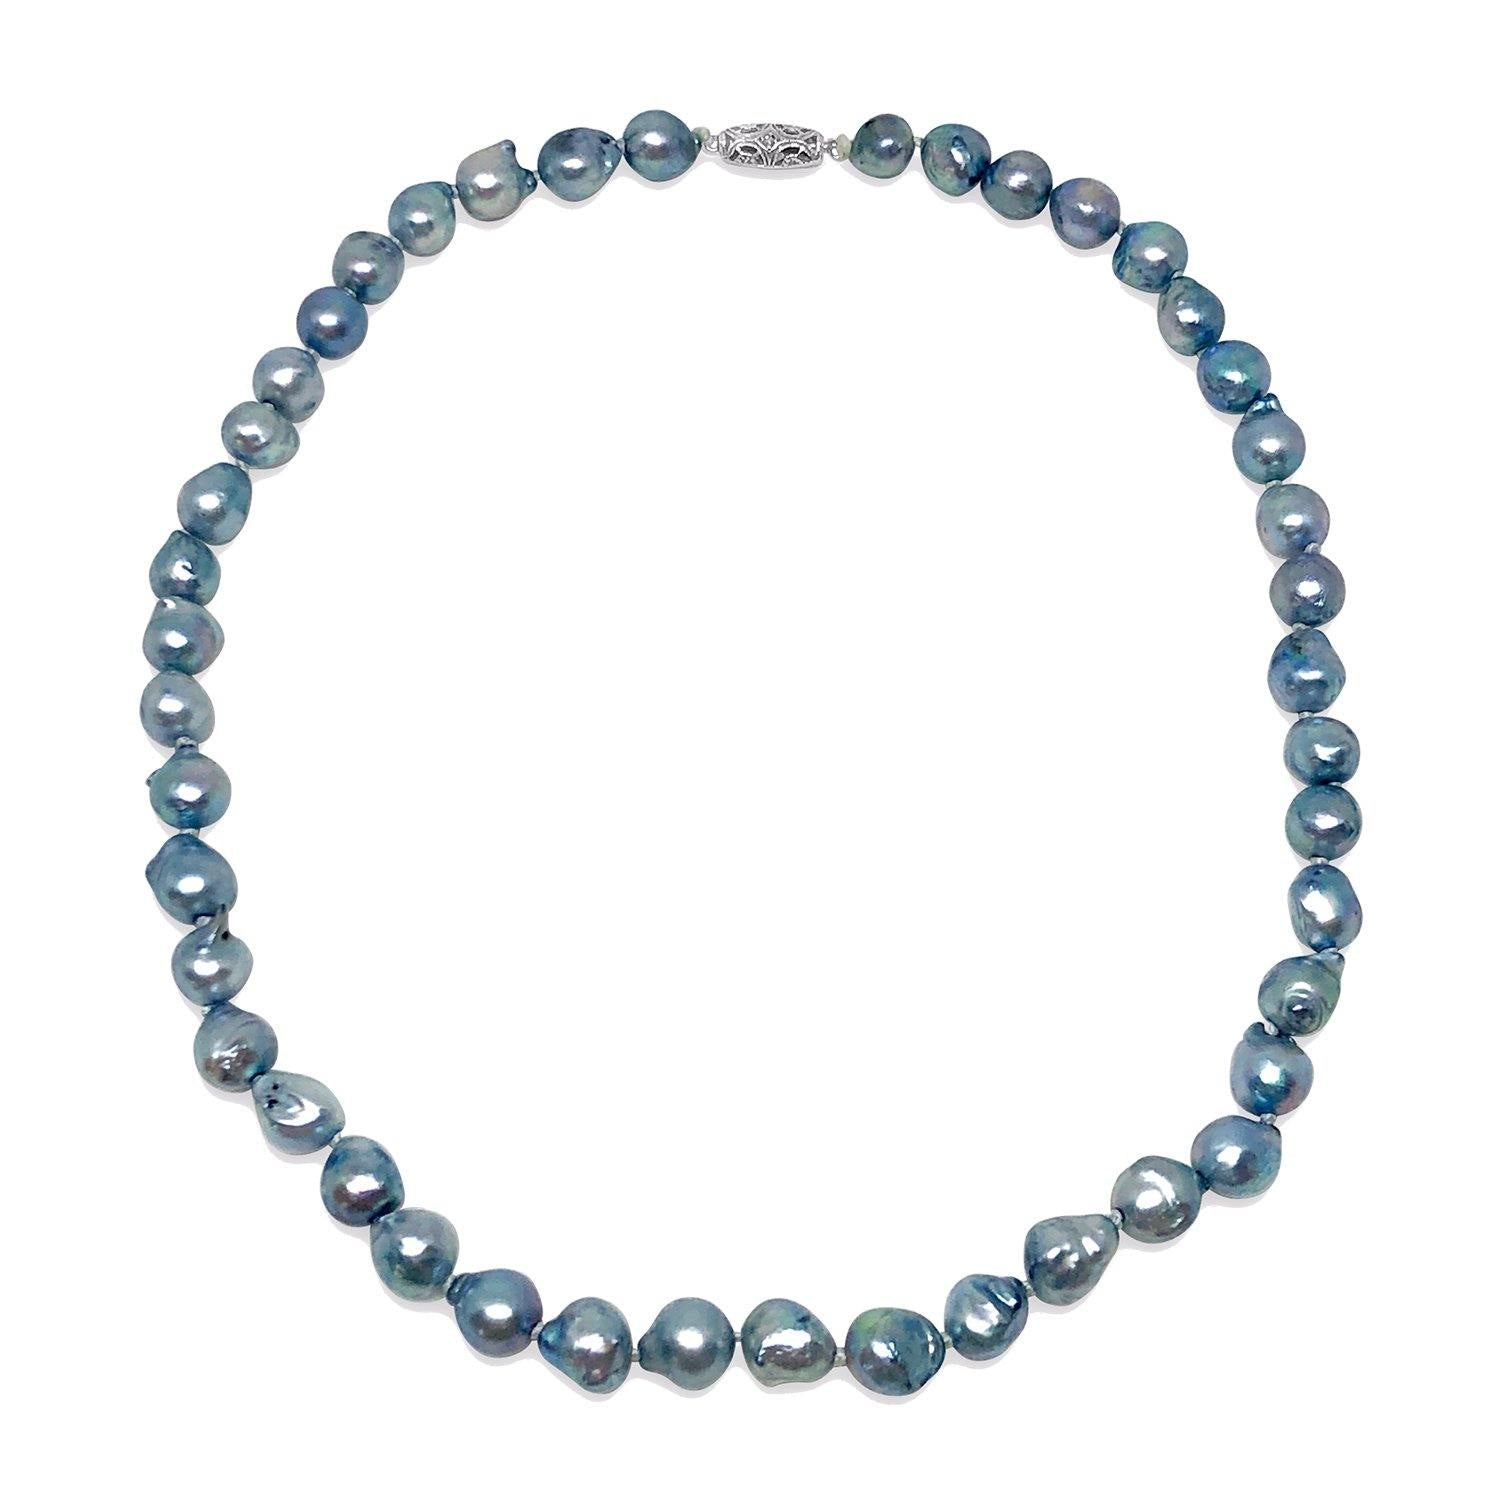 Baroque Blue Mid-Century Japanese Saltwater Cultured Akoya Pearl Choker Necklace - 14K White Gold